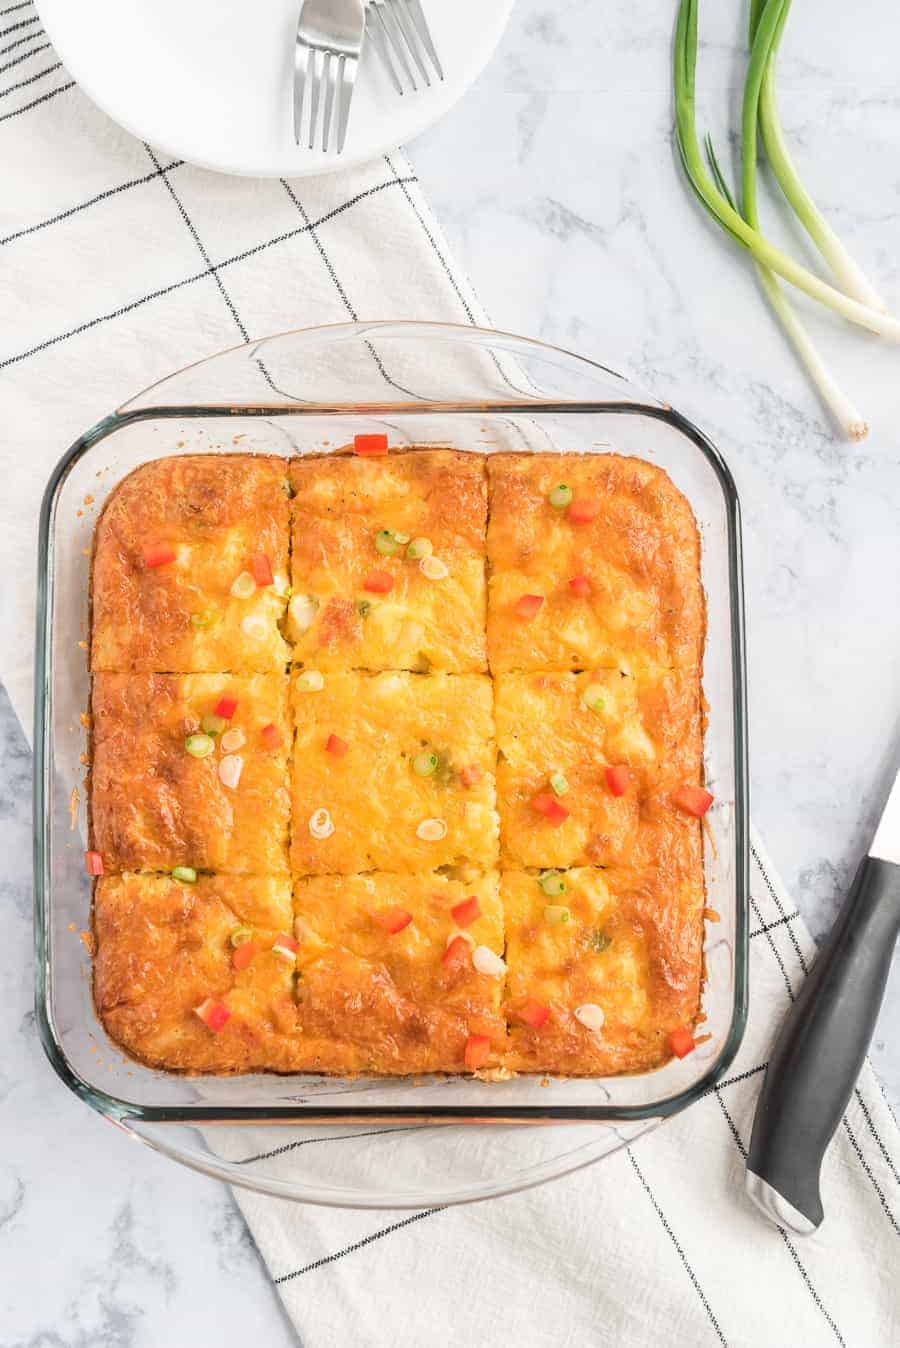 clear baking pan with egg and potato breakfast casserole with little pieces of red pepper and green onions sprinkled on top on white towel with black handled knife beside.